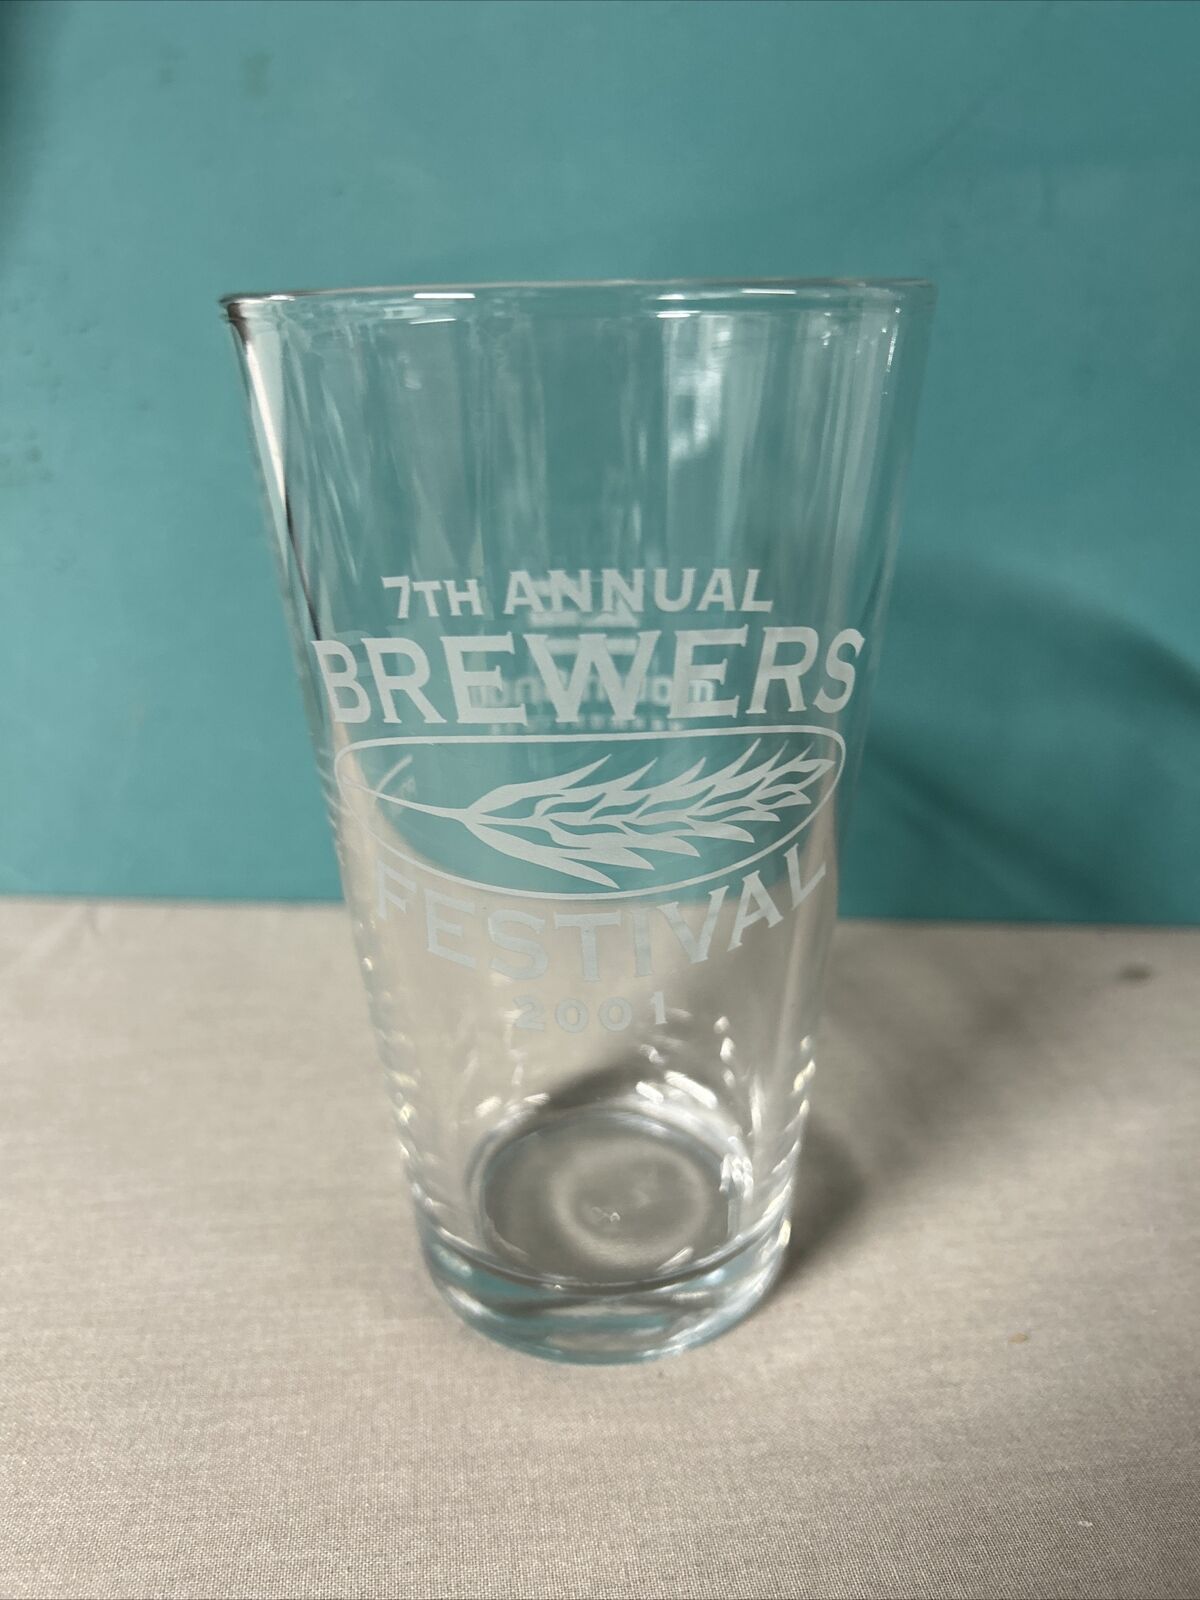 Rare 2001 7th Annual Brewer’s Festival Mount Snow Pint Beer Glass Vermont Beer